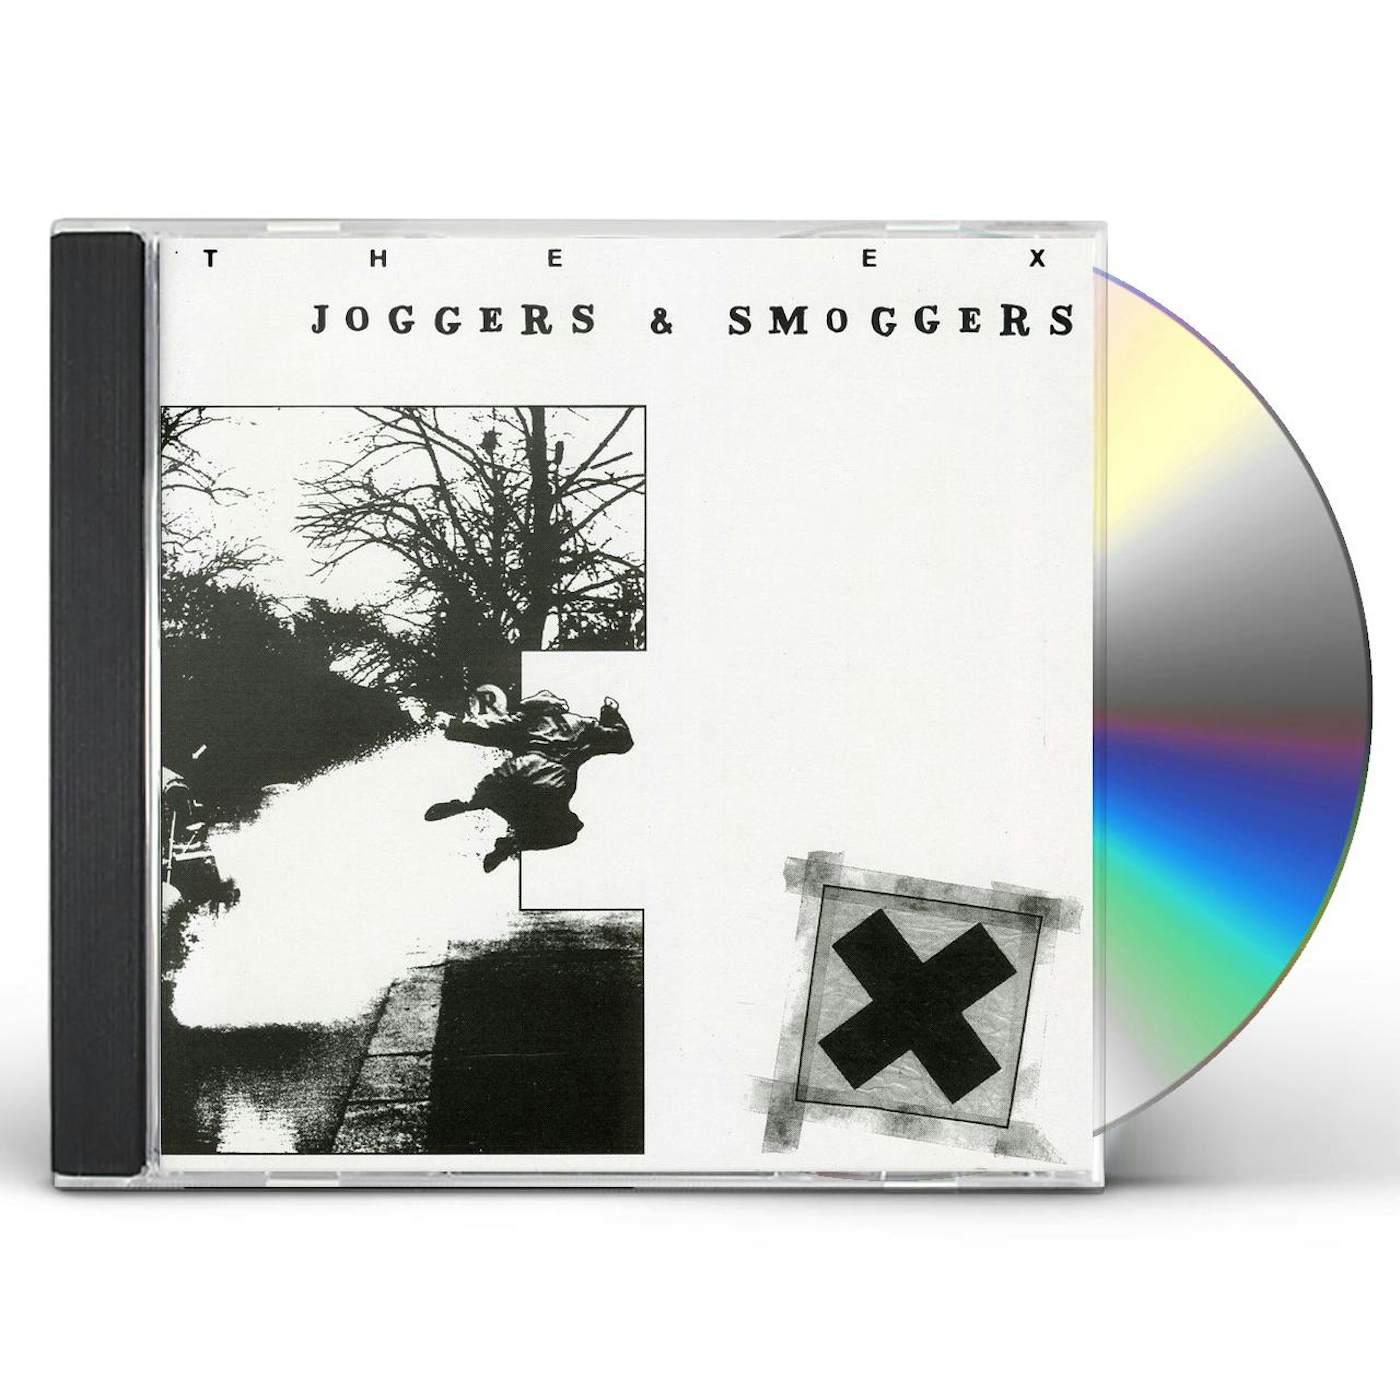 Ex JOGGERS & SMOGGERS CD